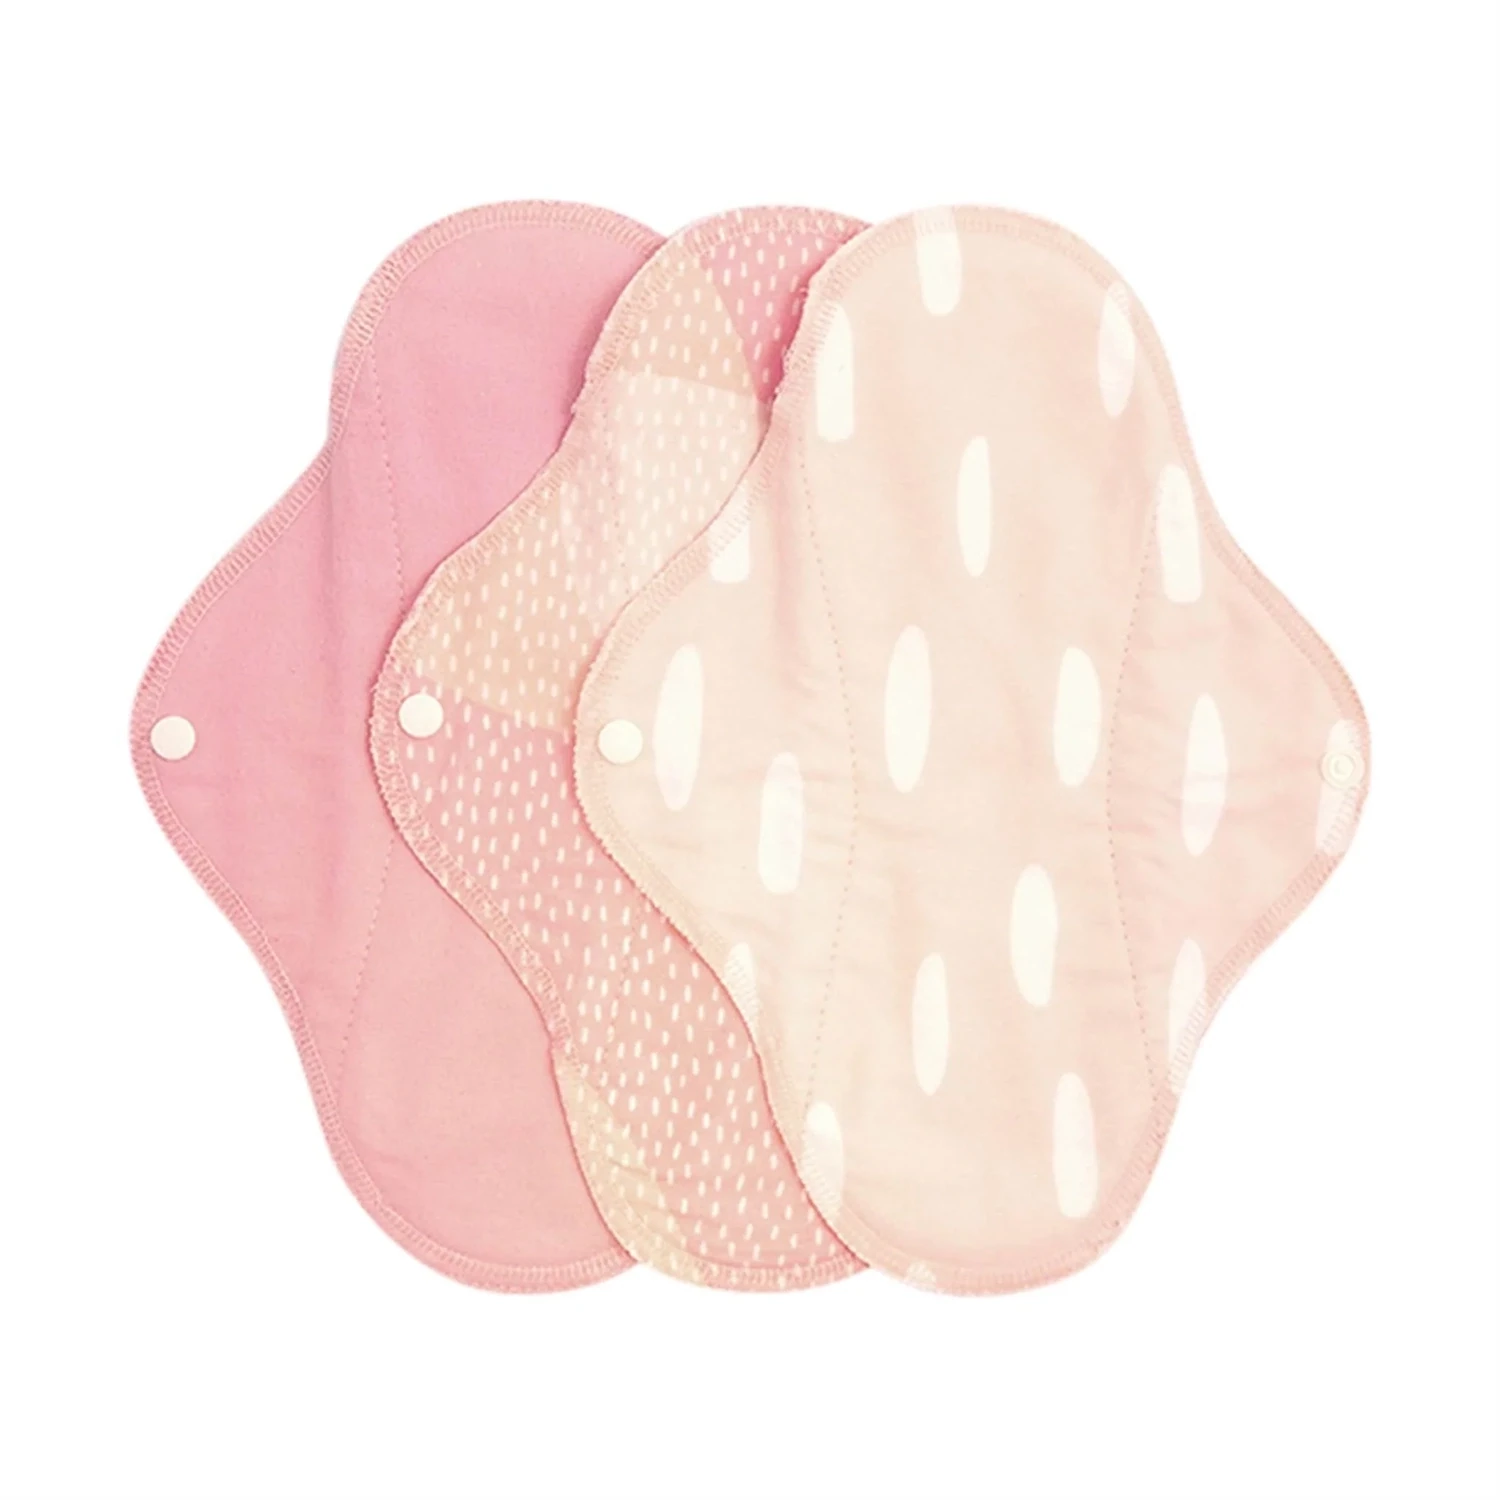 Reusable Sanitary Pads 3 Pack Classic Pink